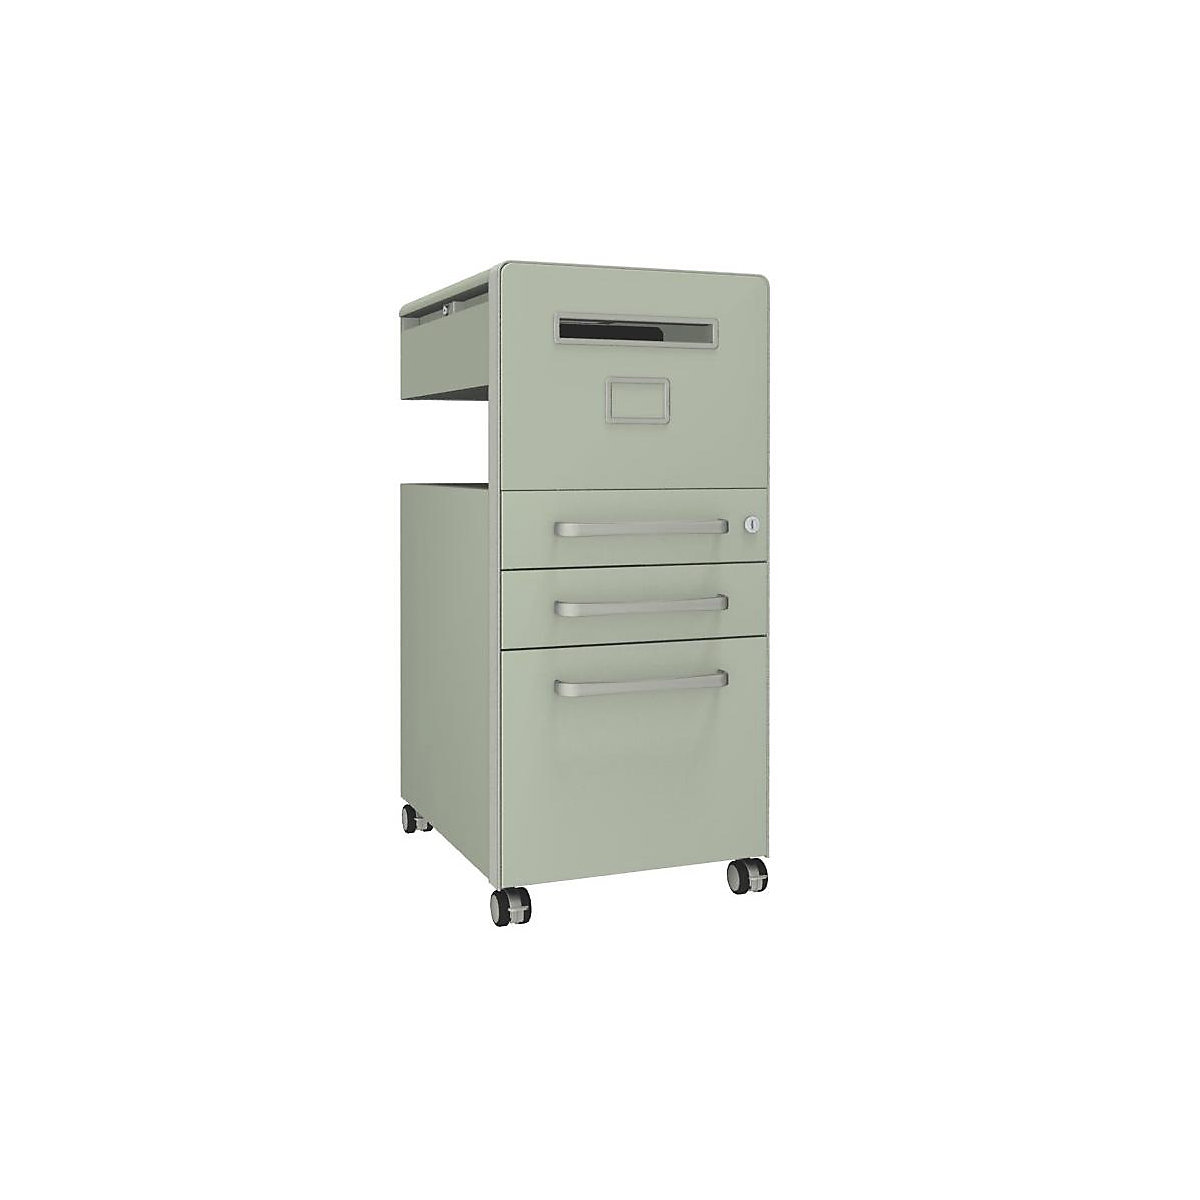 Bite™ pedestal furniture, with 1 whiteboard, opens on the right side – BISLEY, with 2 universal drawers, 1 suspension file drawer, portland-9